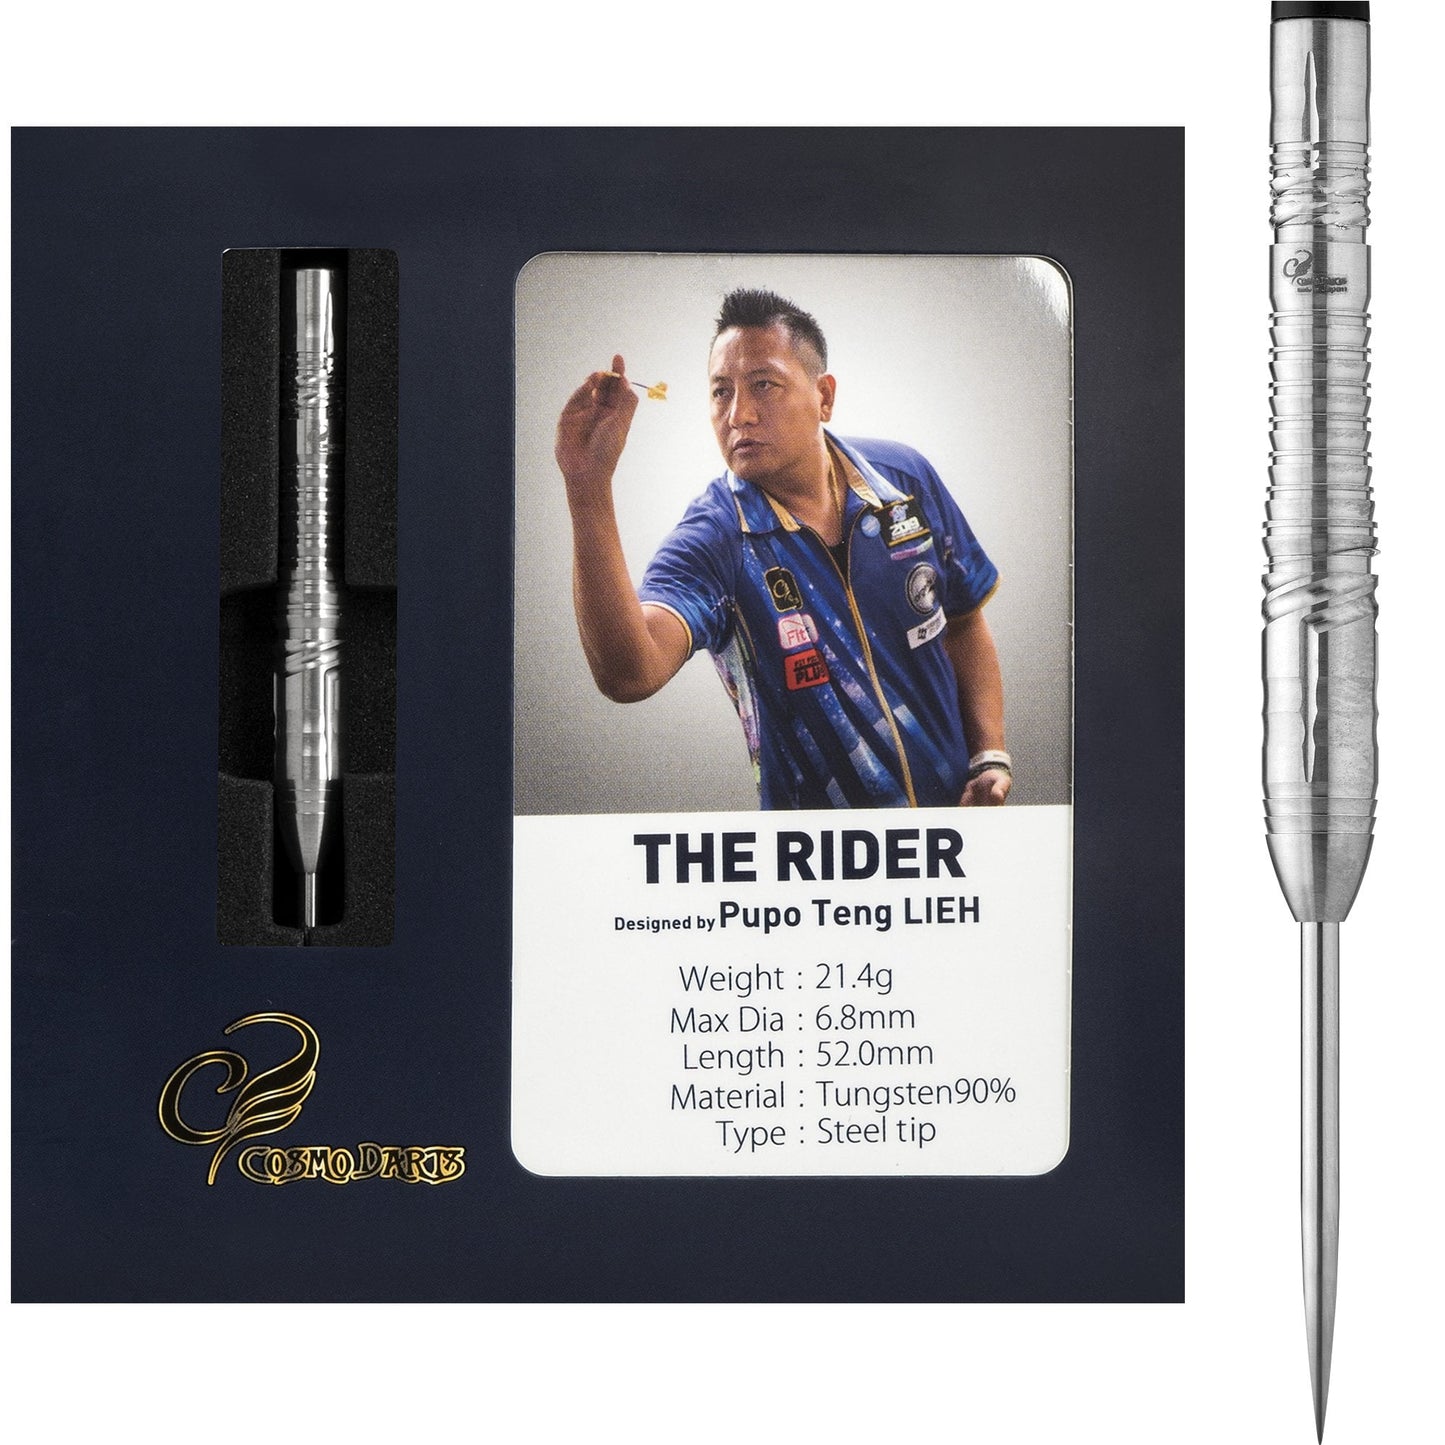 Cosmo Darts - Steel Tip Tungsten - The Rider - 21g PERS